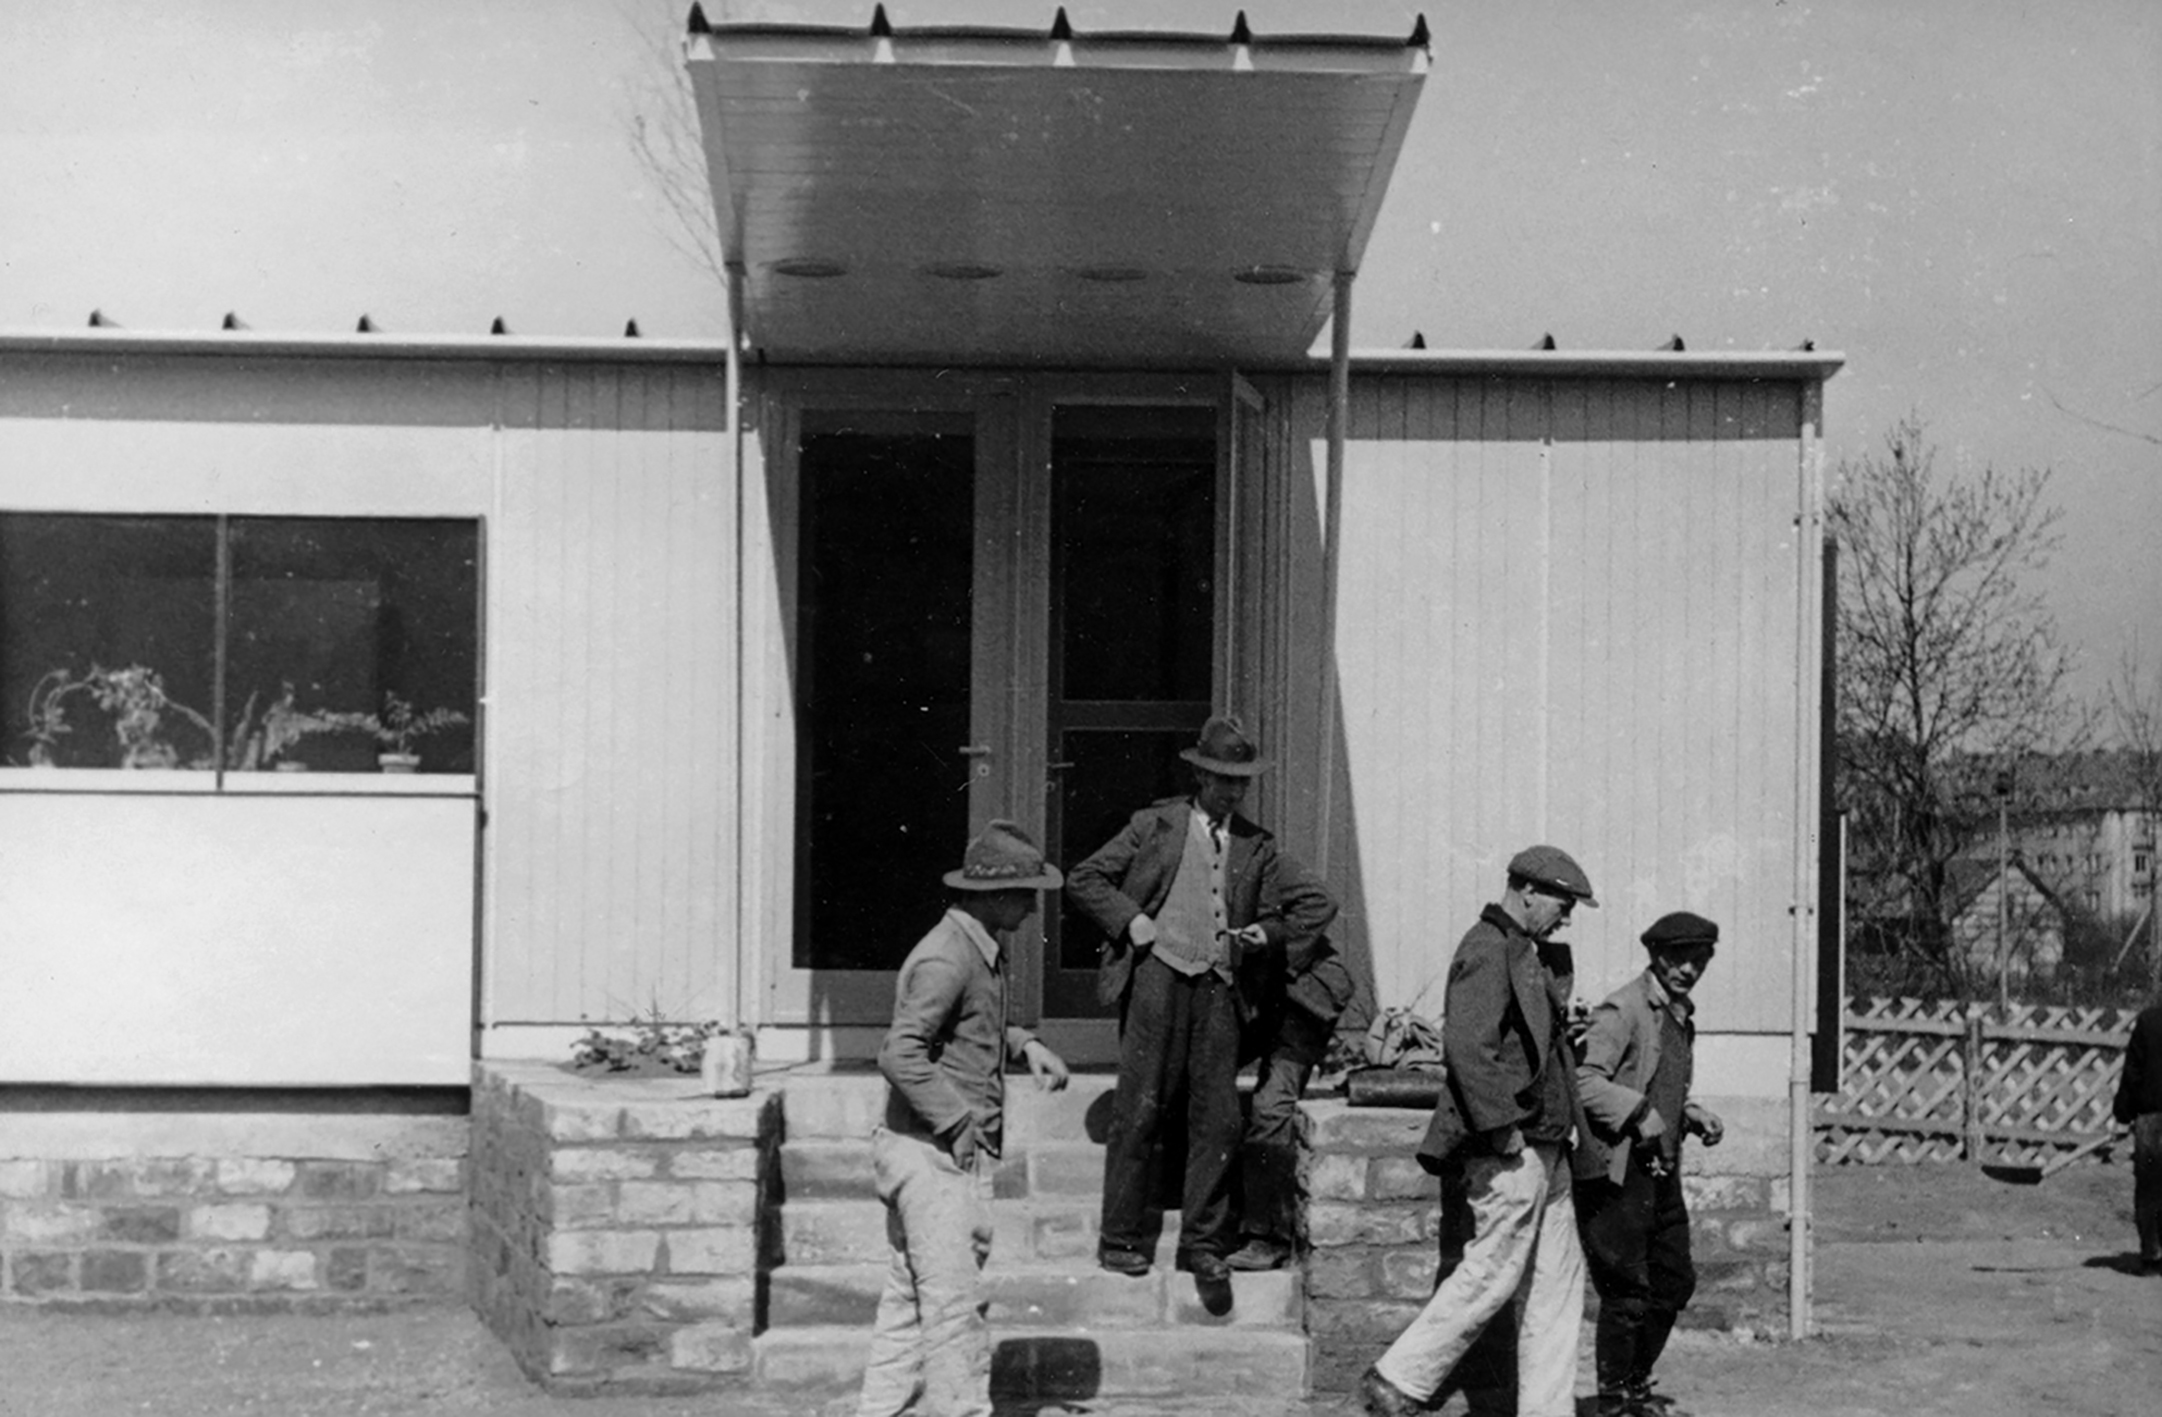 8x8 Demountable house, 1947. Display house assembled in Sarrebrücken and used as a social welfare by the French military government.